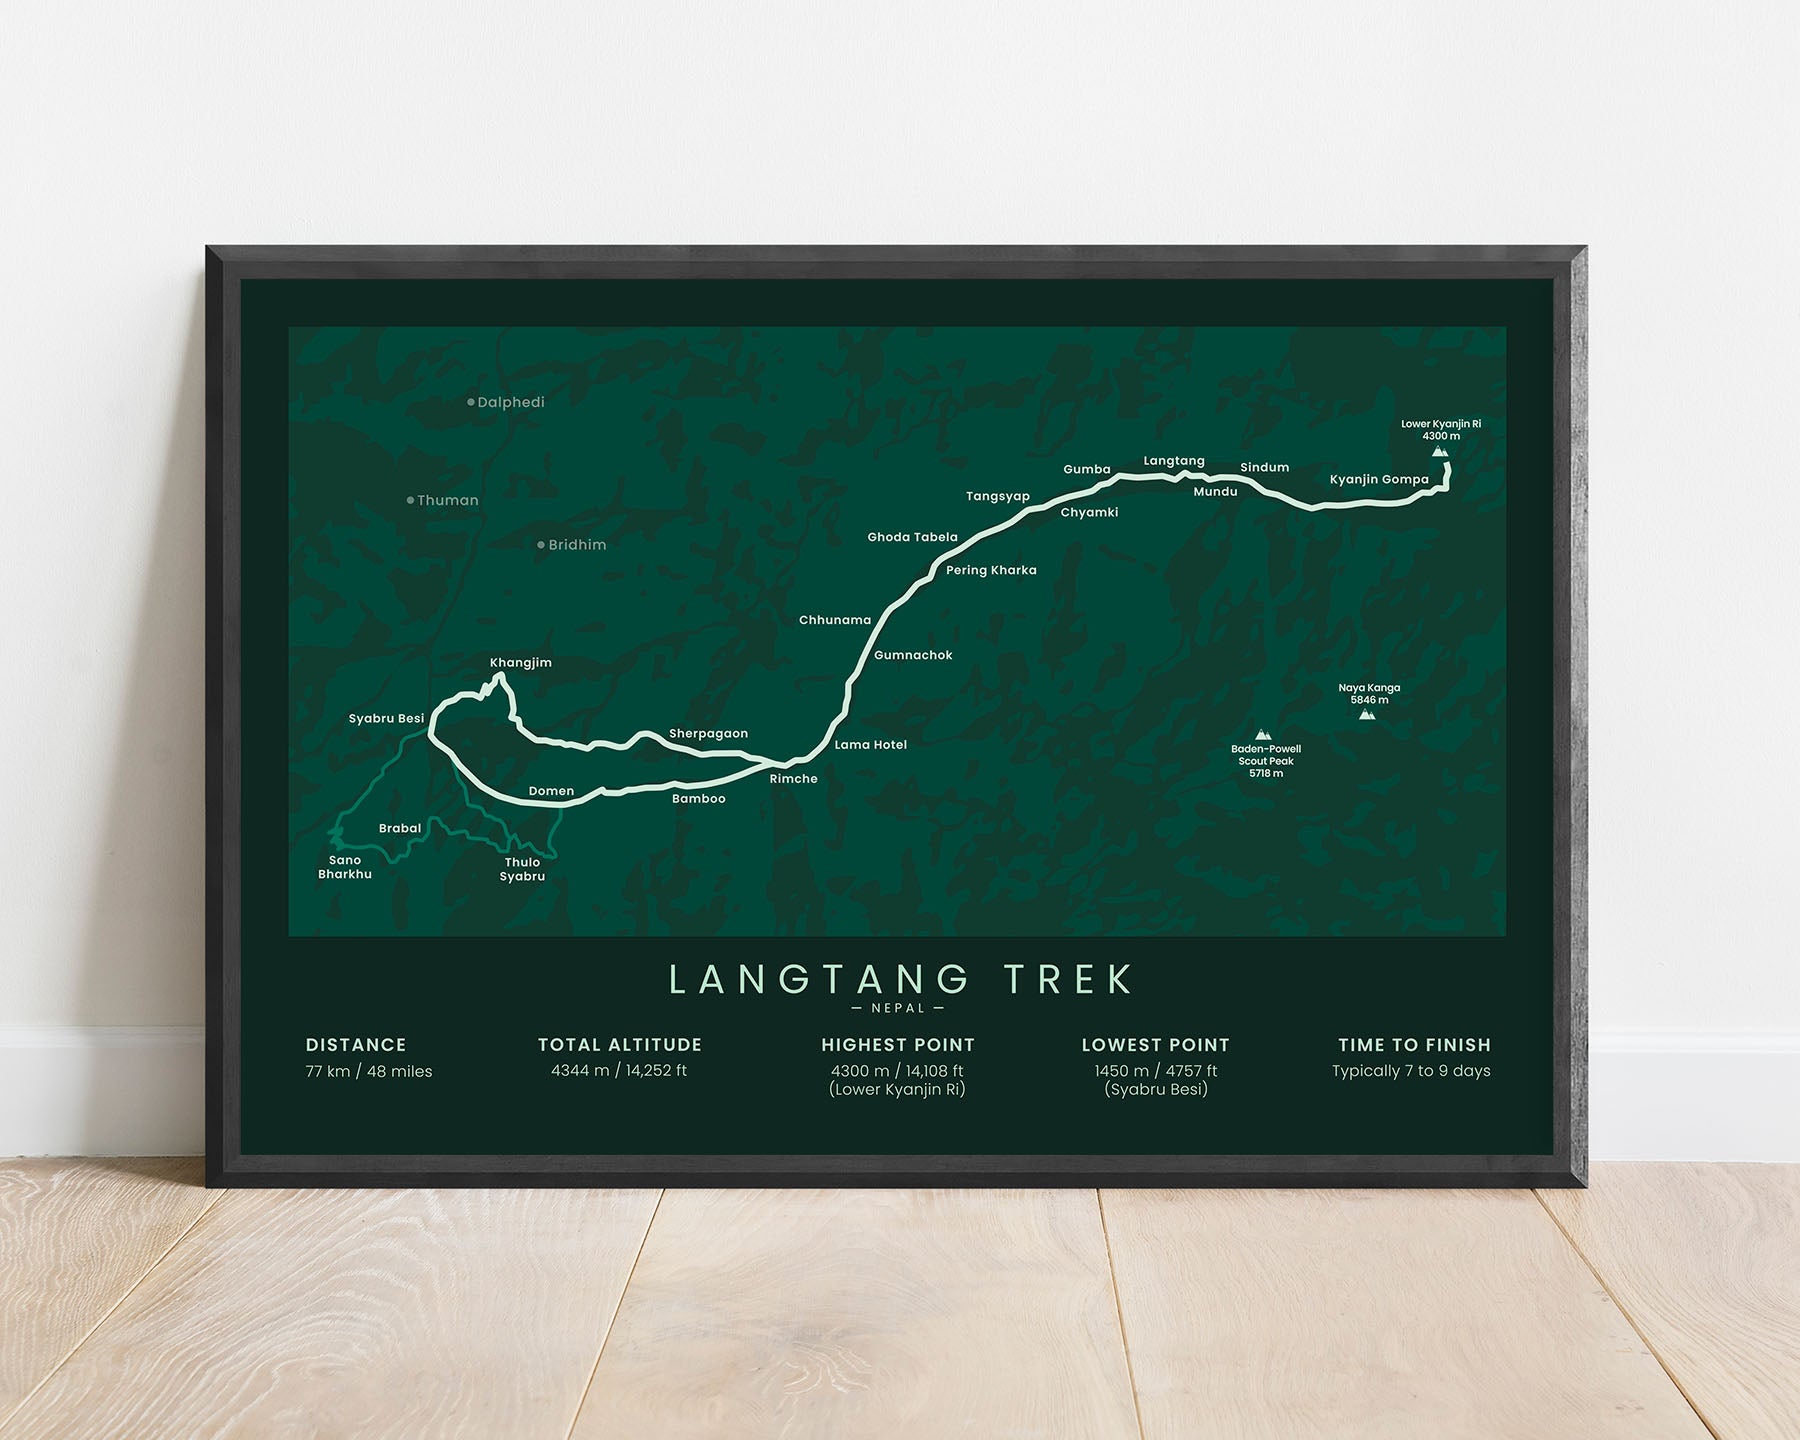 Langtang Trek (Nepal, Himalayas) trail wall map with green background